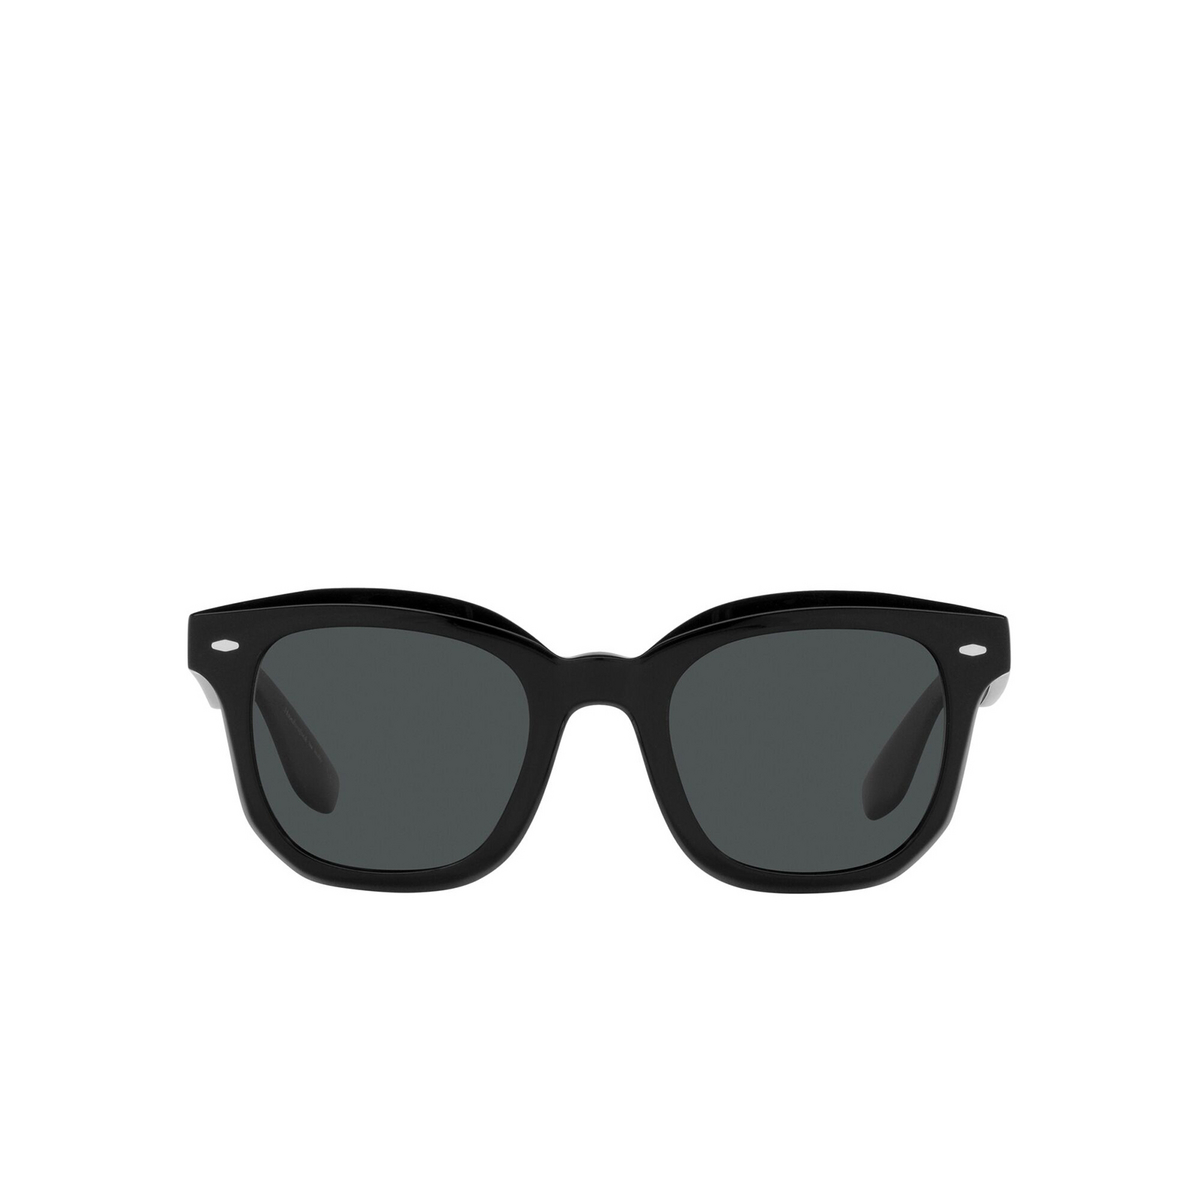 Oliver Peoples FILU' Sunglasses 1005P2 Black - front view